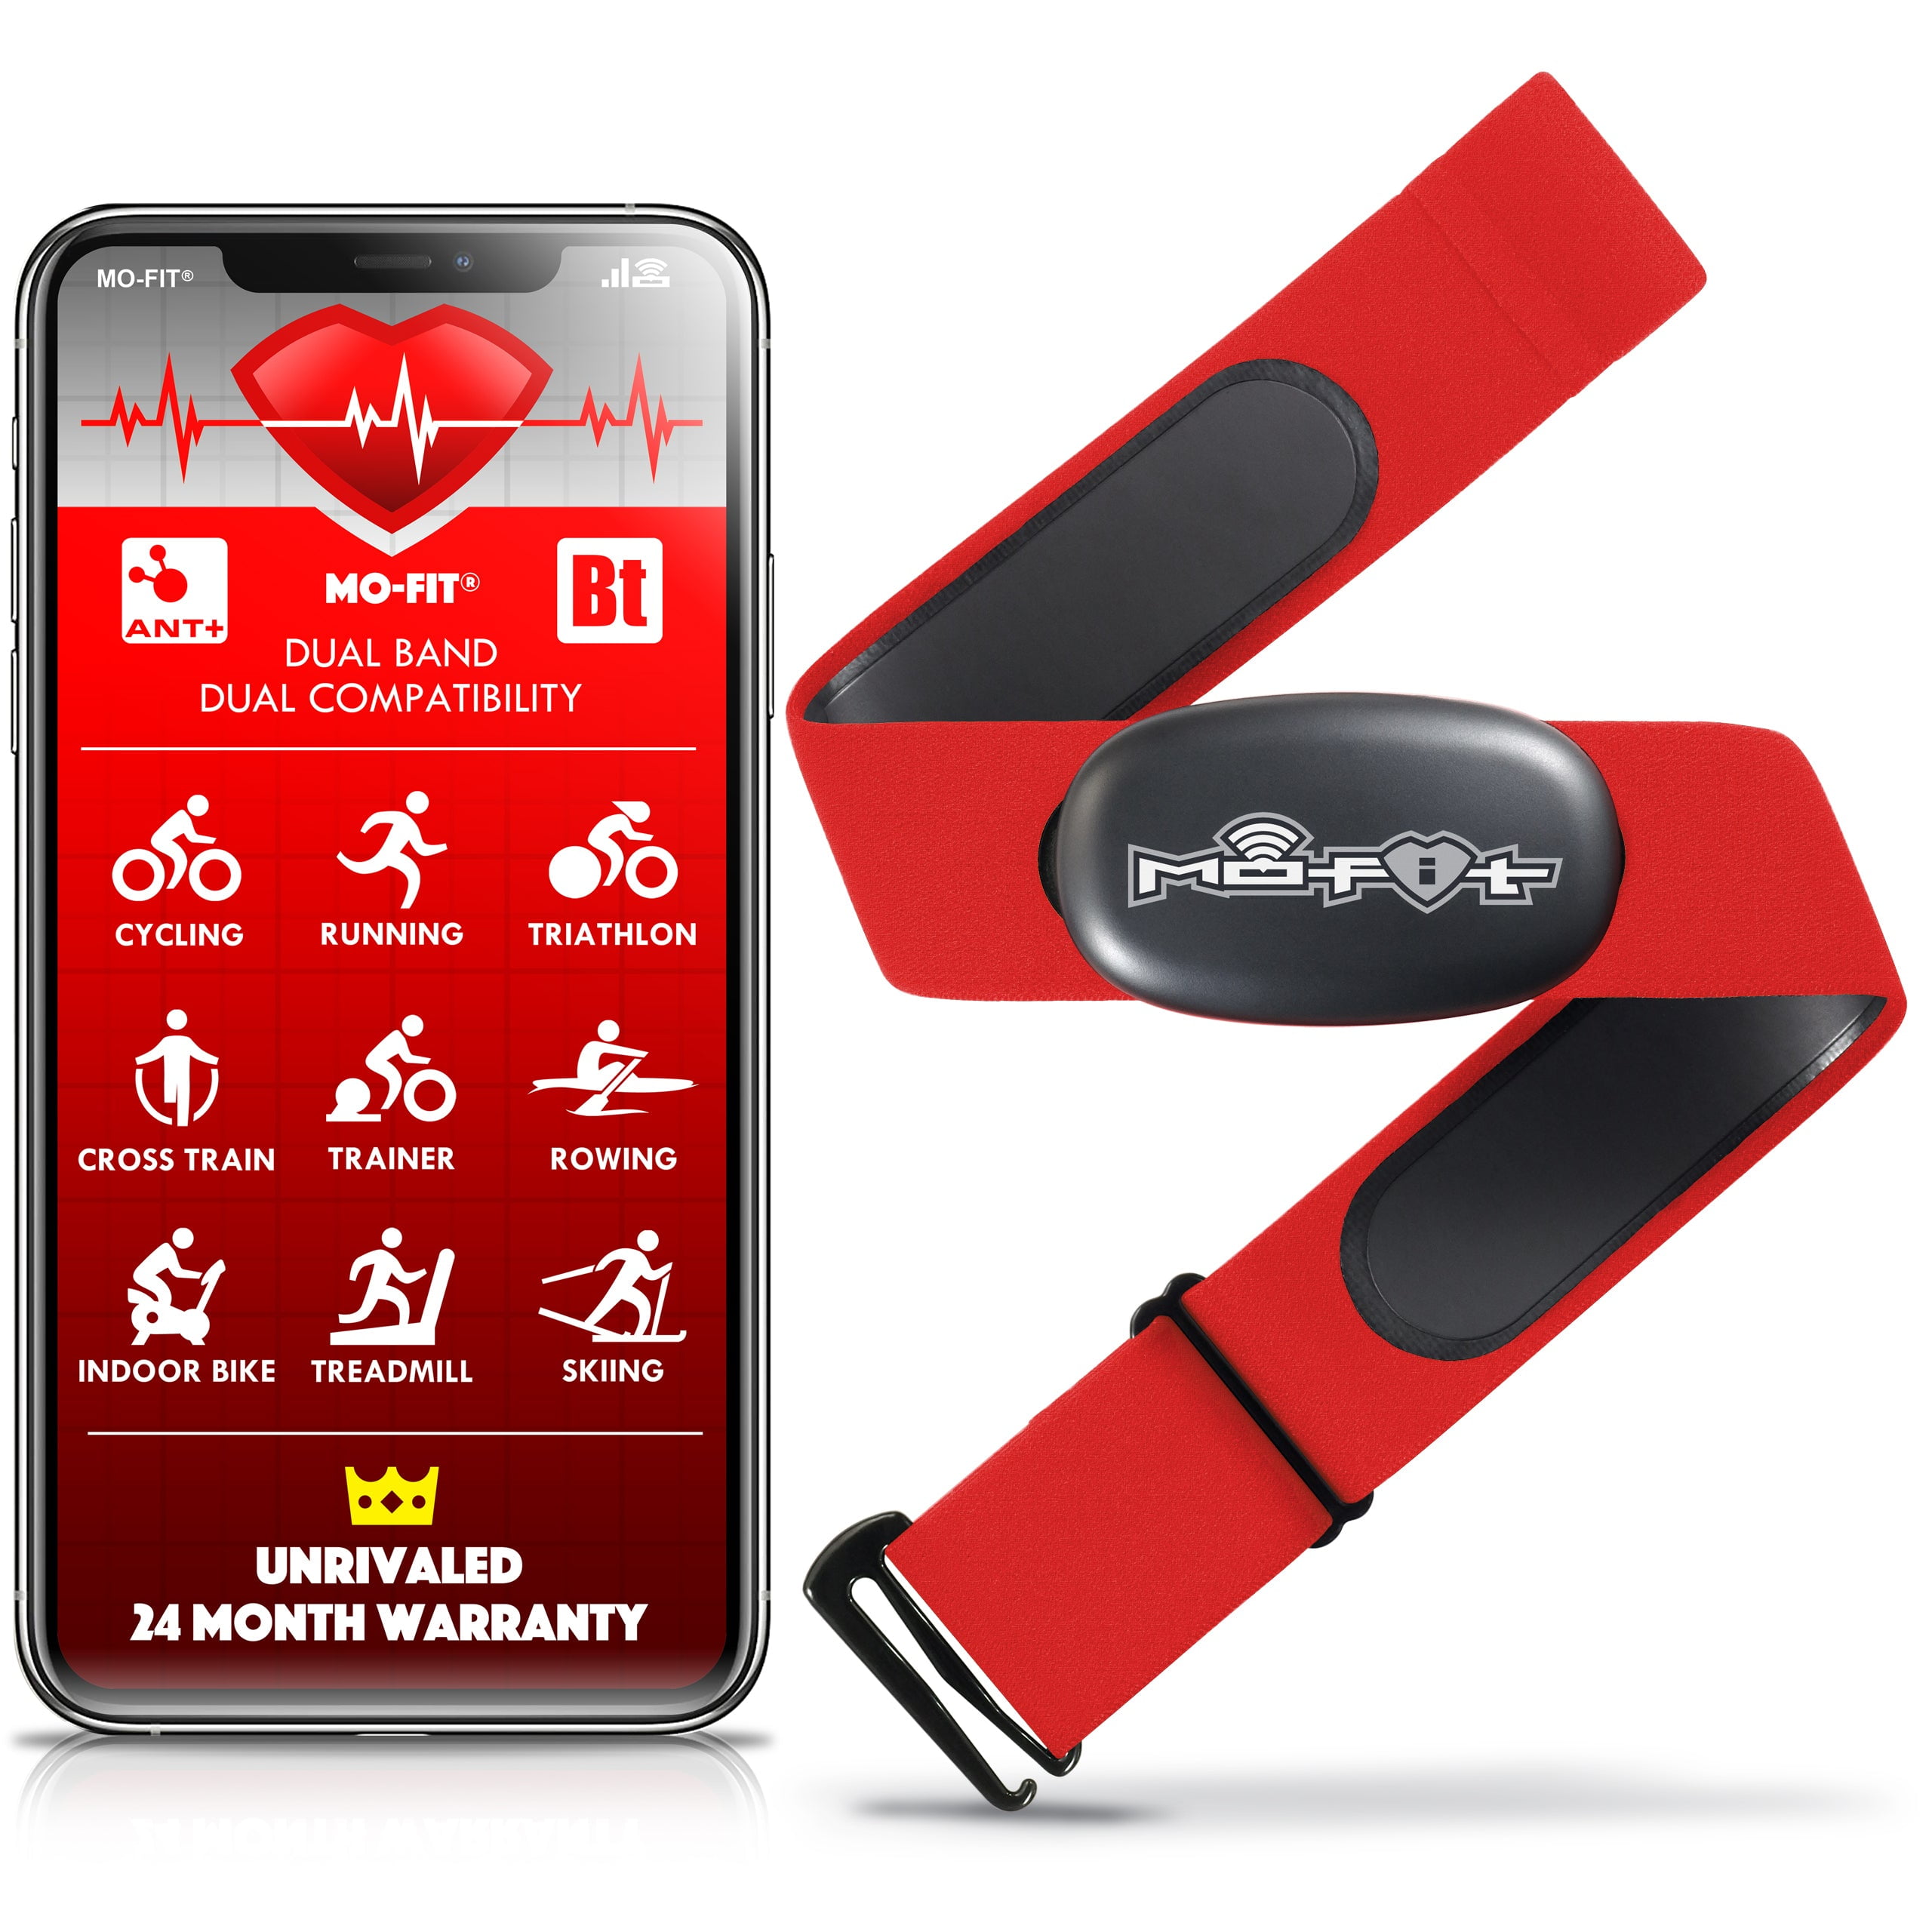 vil beslutte side Grudge Mo-Fit Heart Rate Monitor Chest Strap for Garmin, Apple, Android, Peloton,  Zwift, ANT+ and Most Bluetooth 4.0 Enabled Fitness Devices - Walmart.com